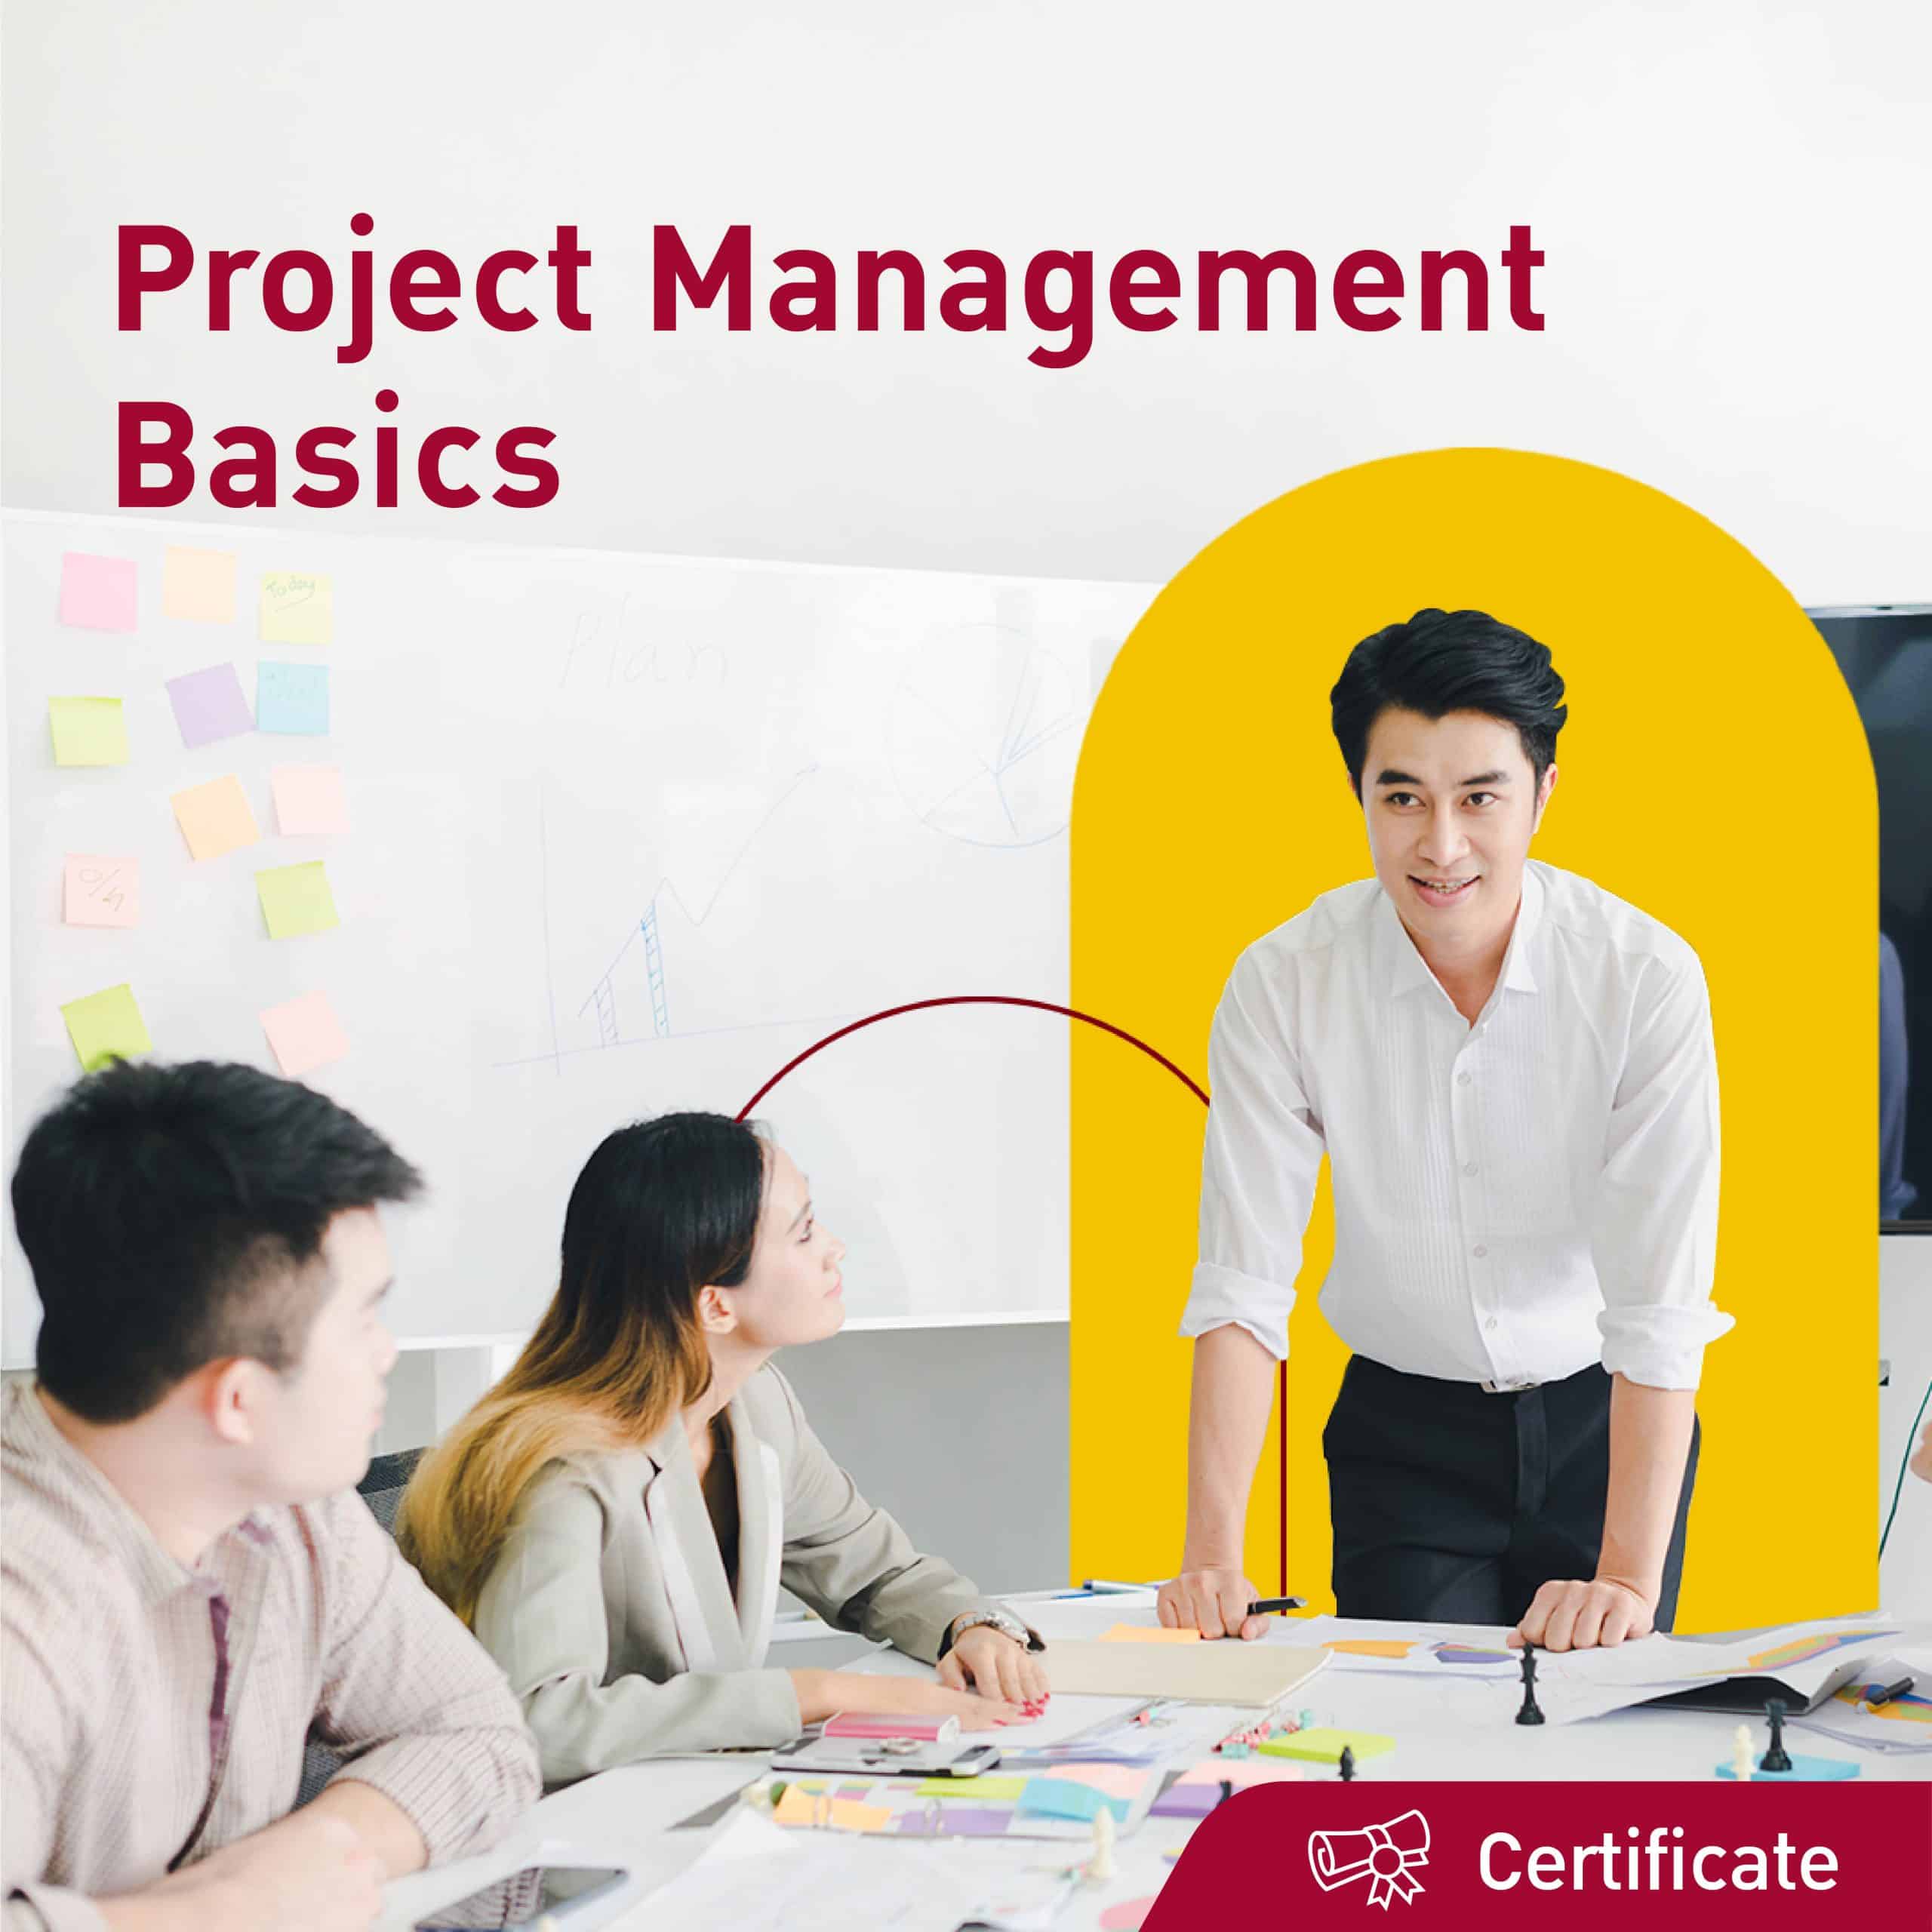 AW_Jobs Base Learning_Project Management Basics_1080x1080 (1)